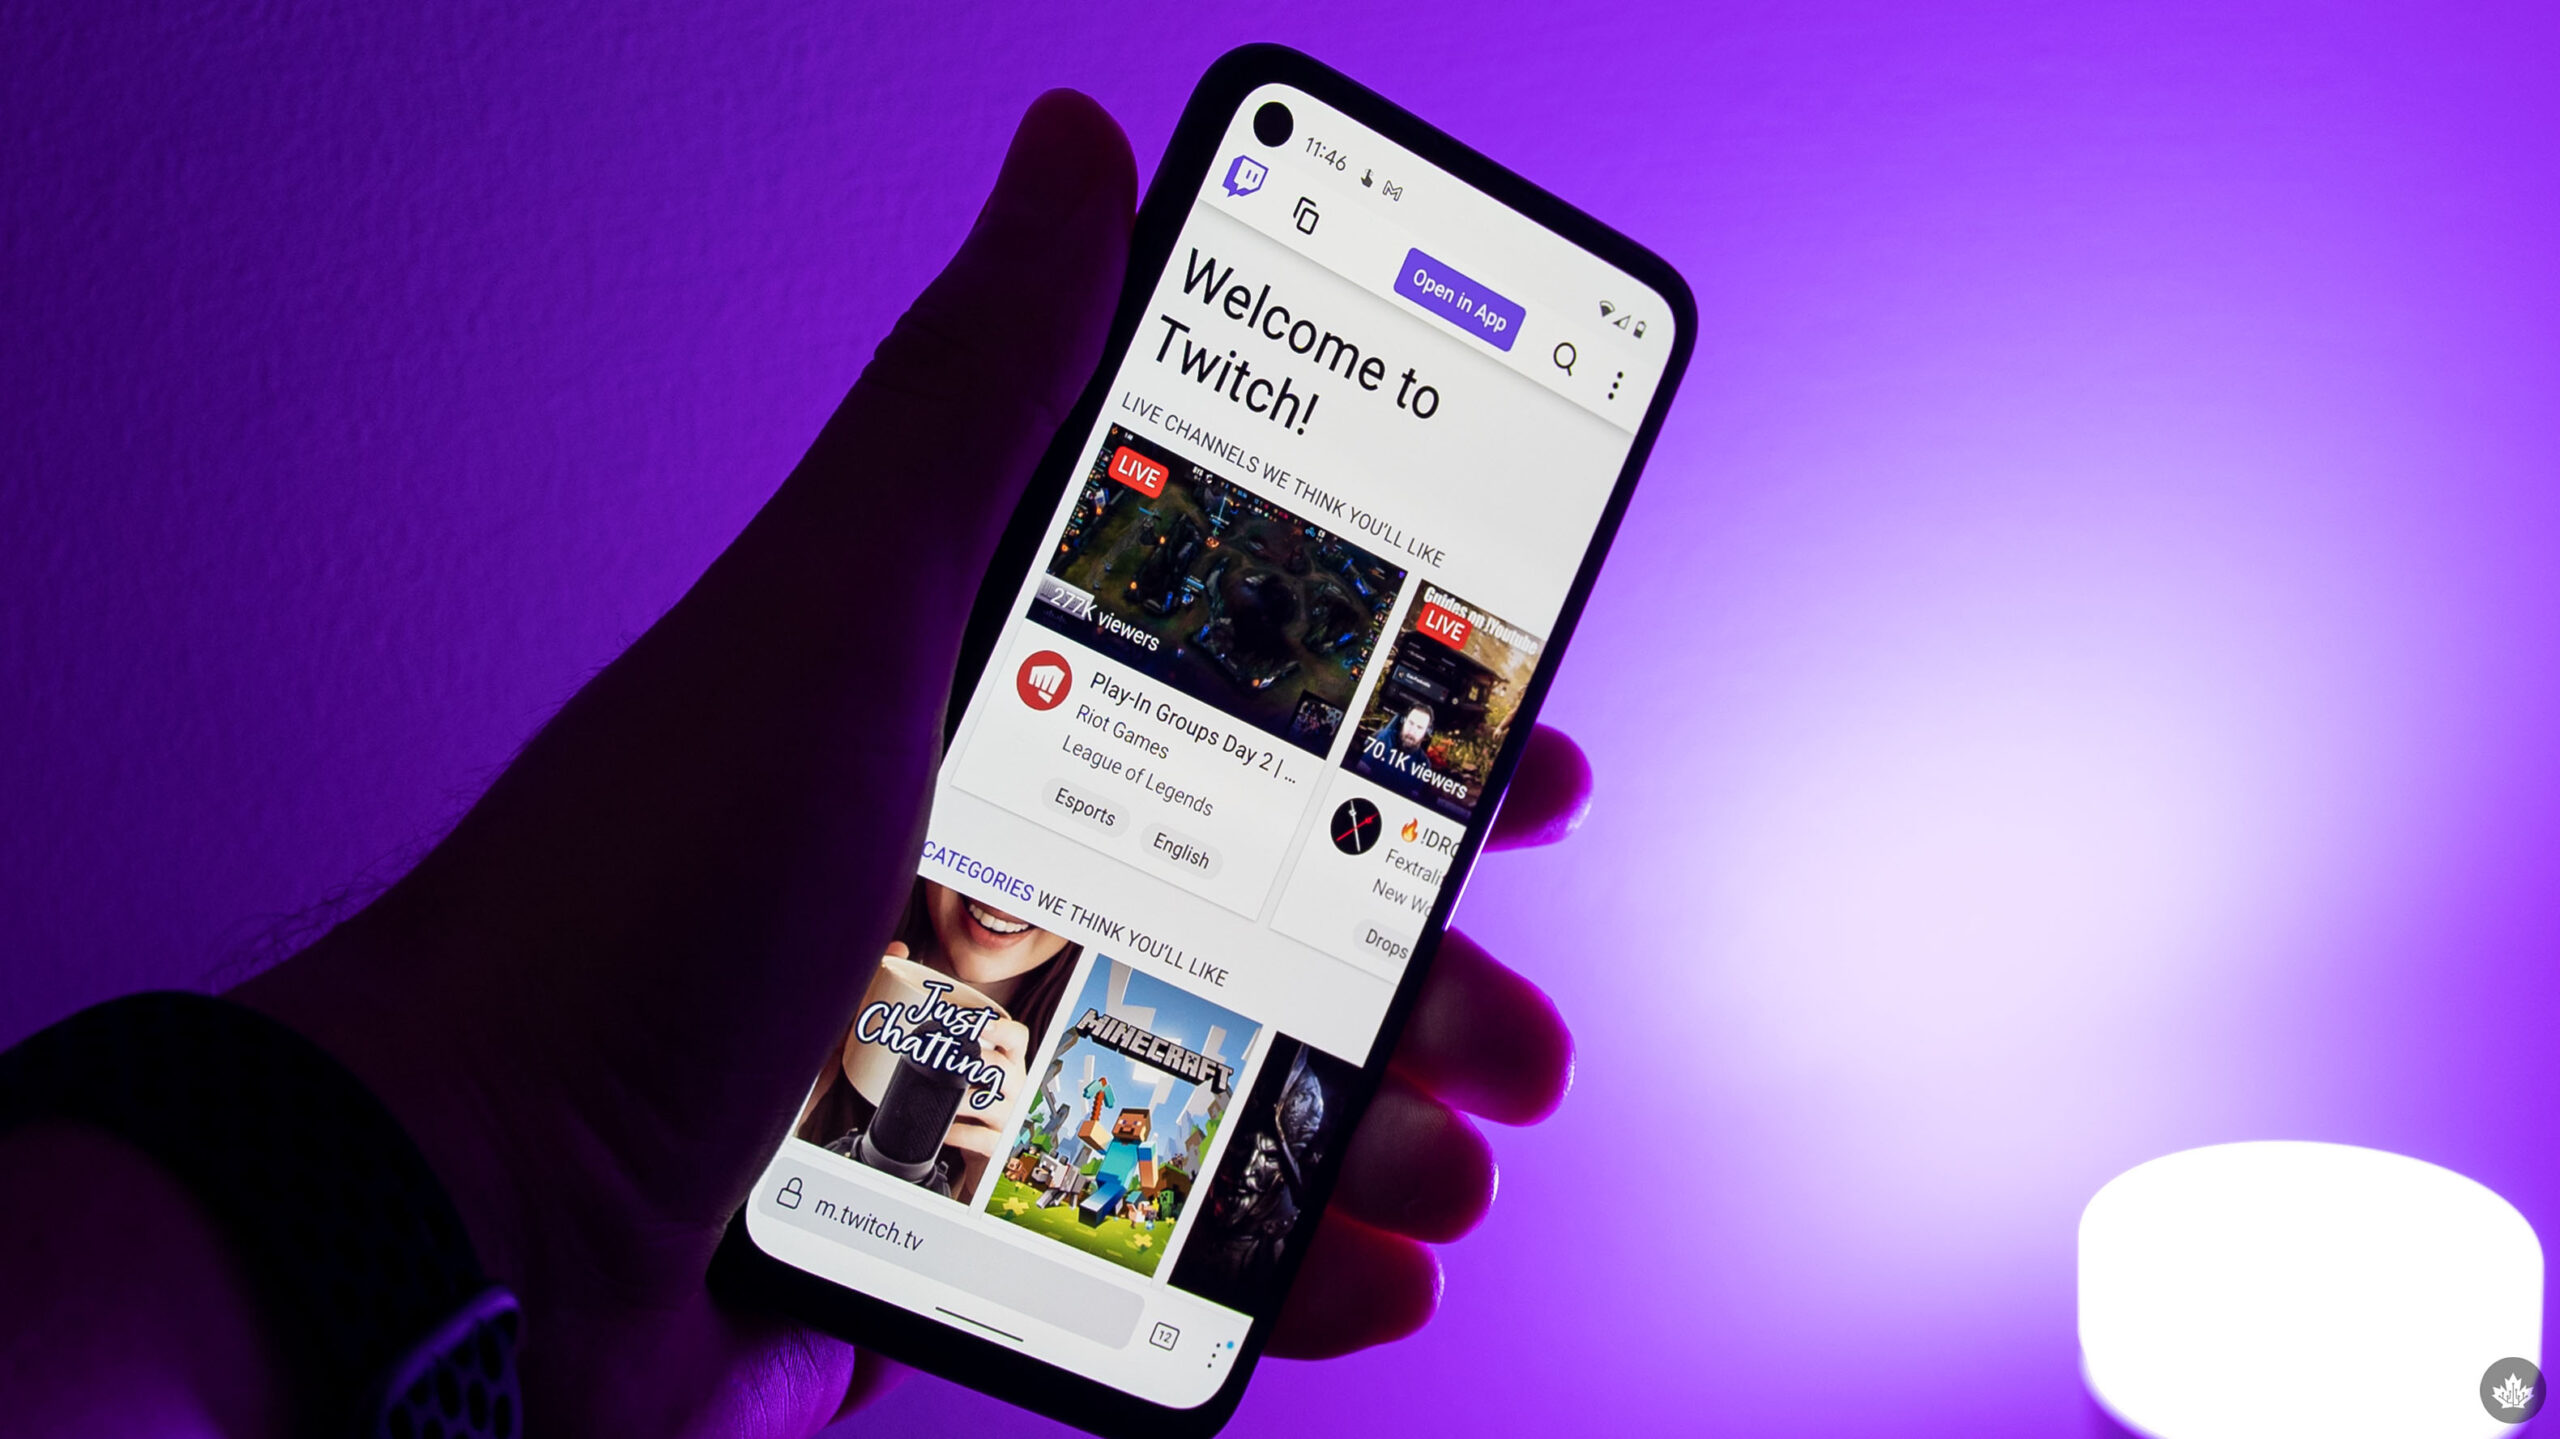 Twitch website on Android phone